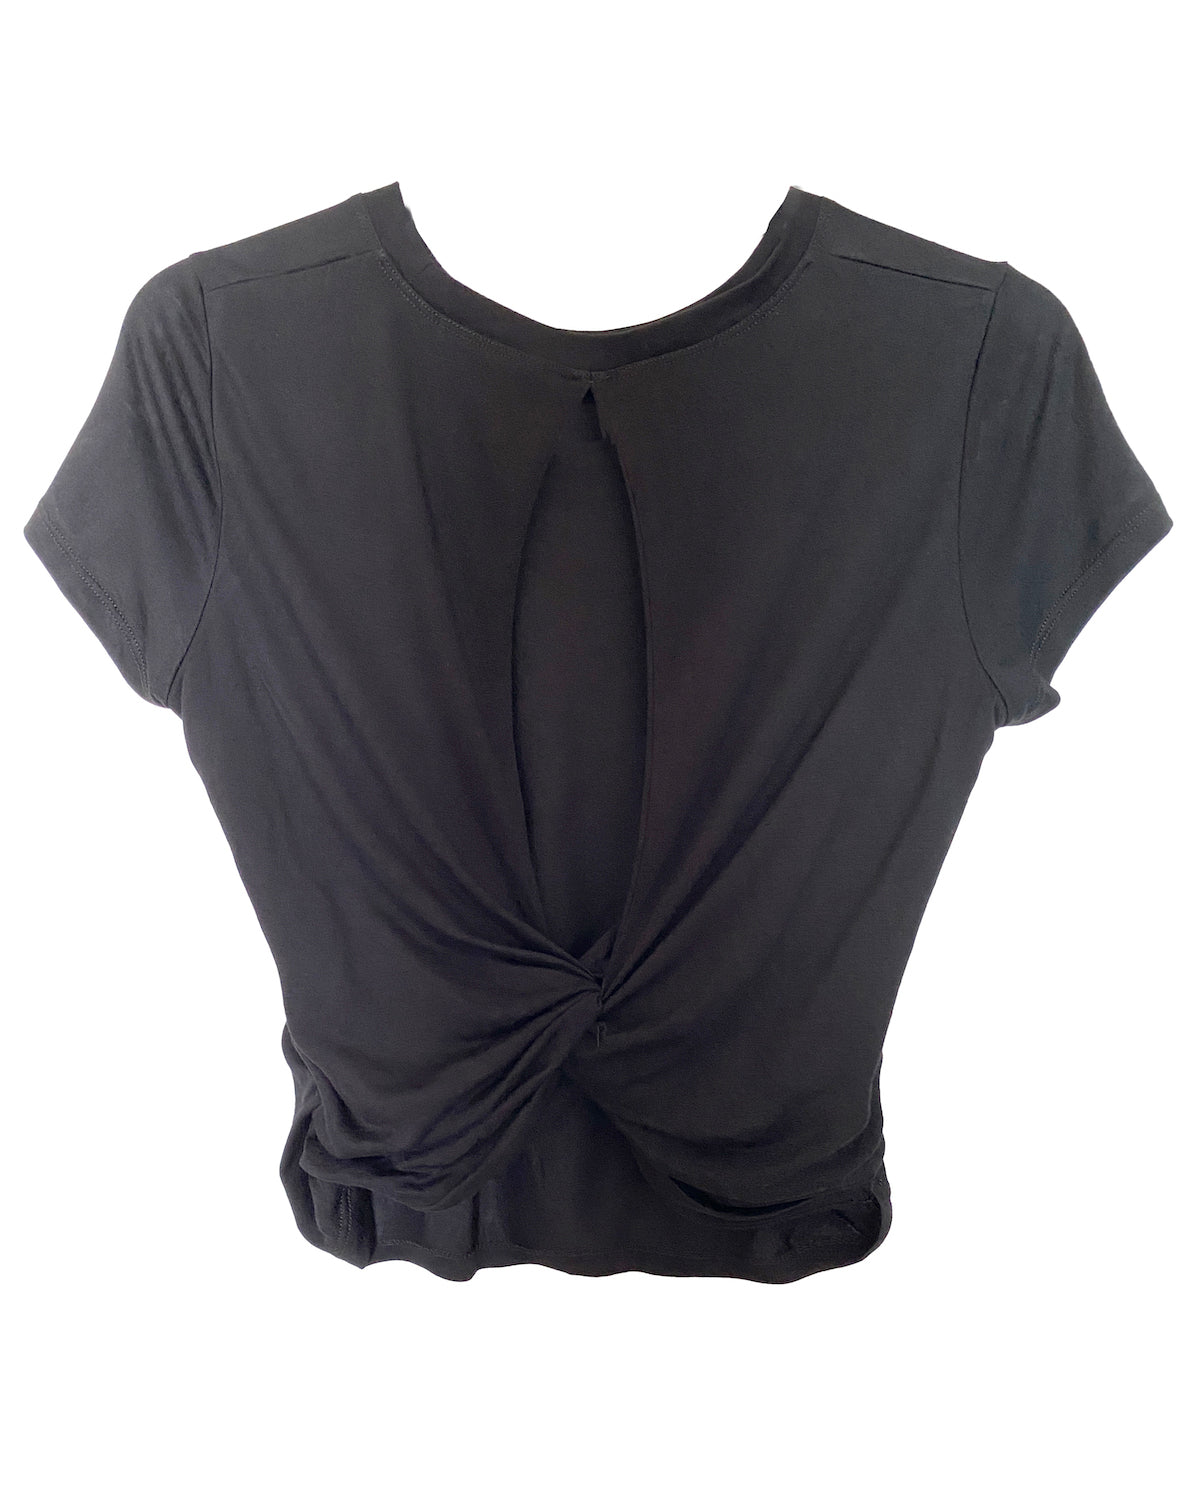 black cutout back cropped sports tee *pre-order*